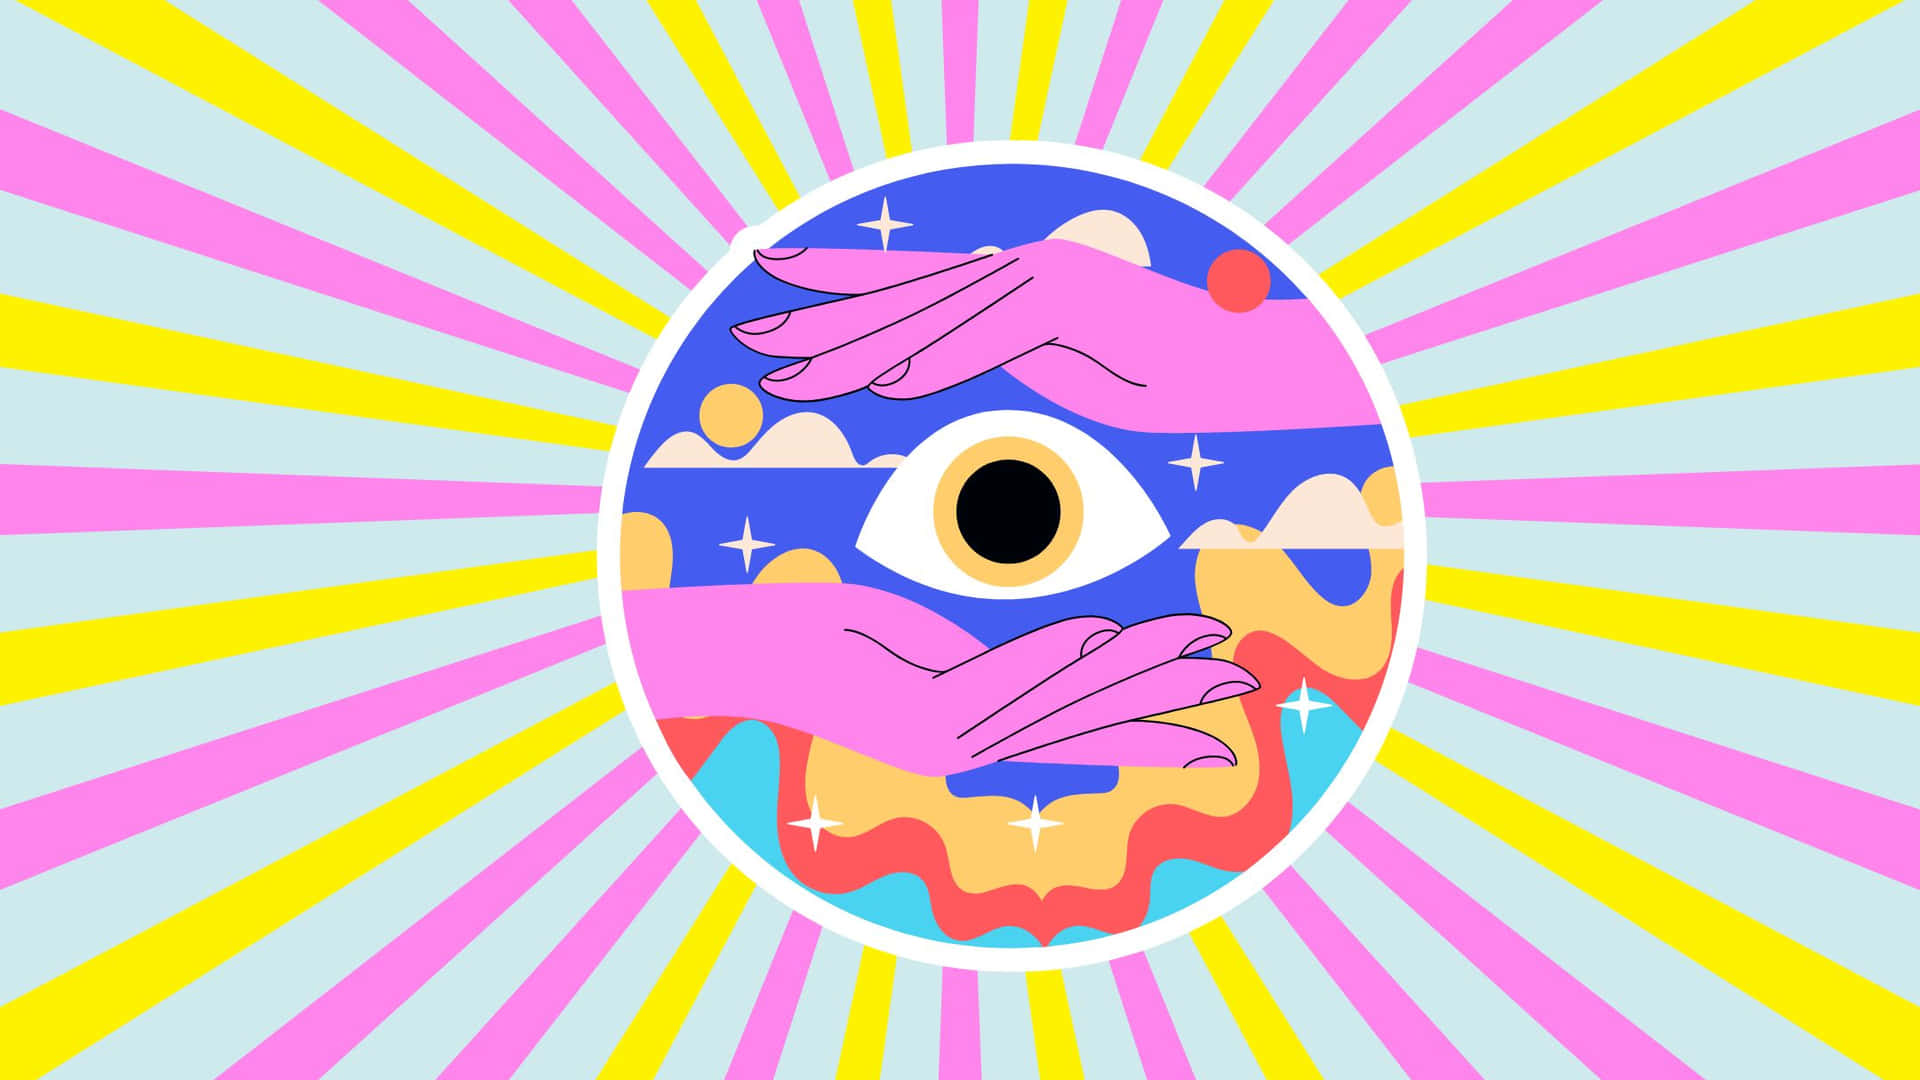 An Illustration Of An Eye With Hands In The Background